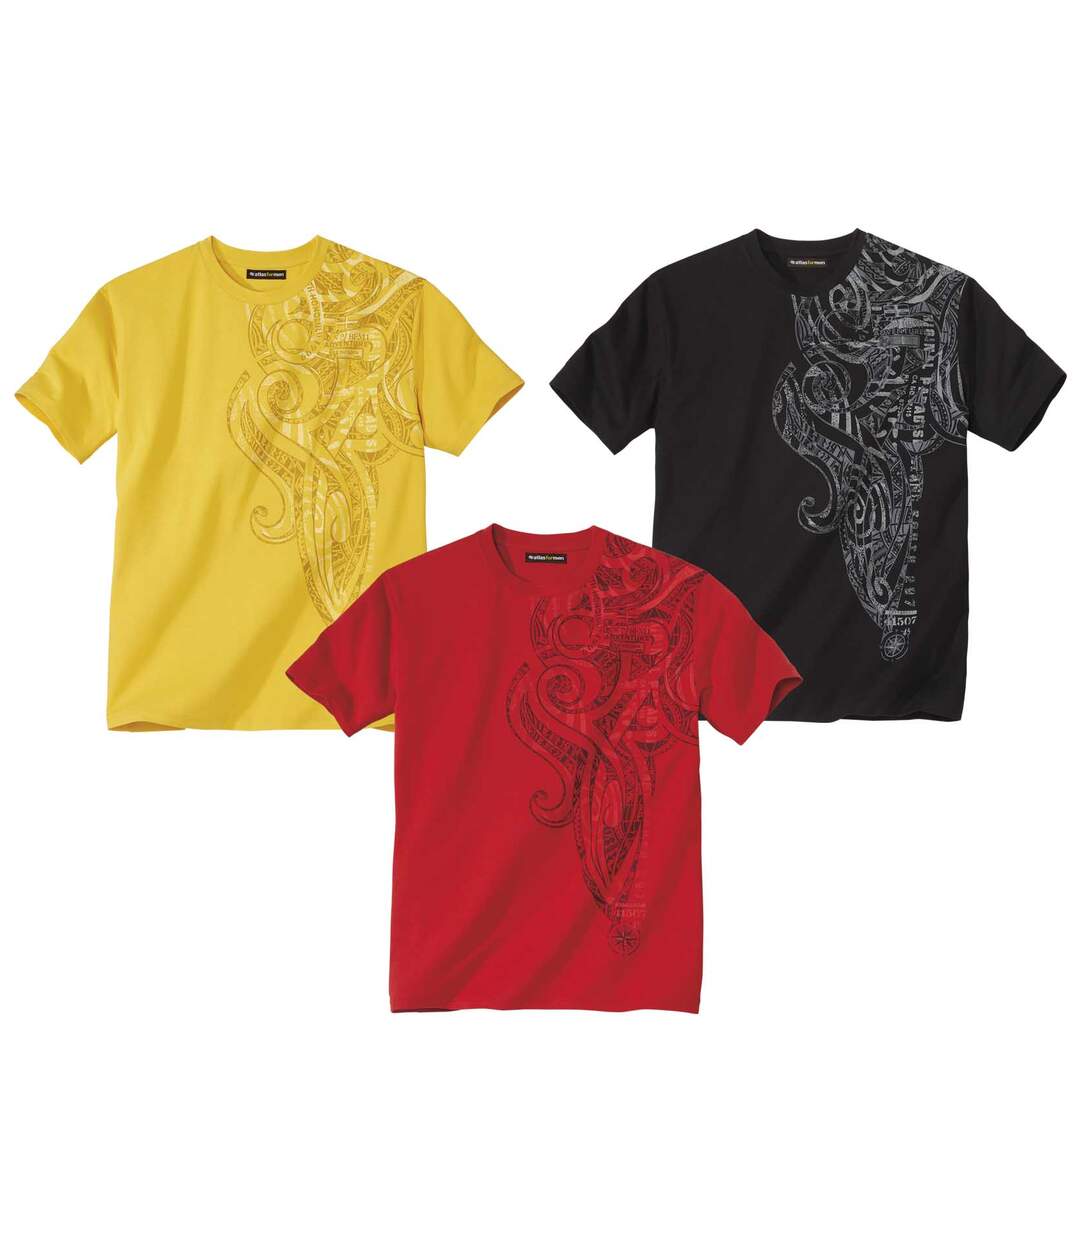 Pack of 3 Men's Graphic Print T-Shirts - Yellow Black Red Atlas For Men